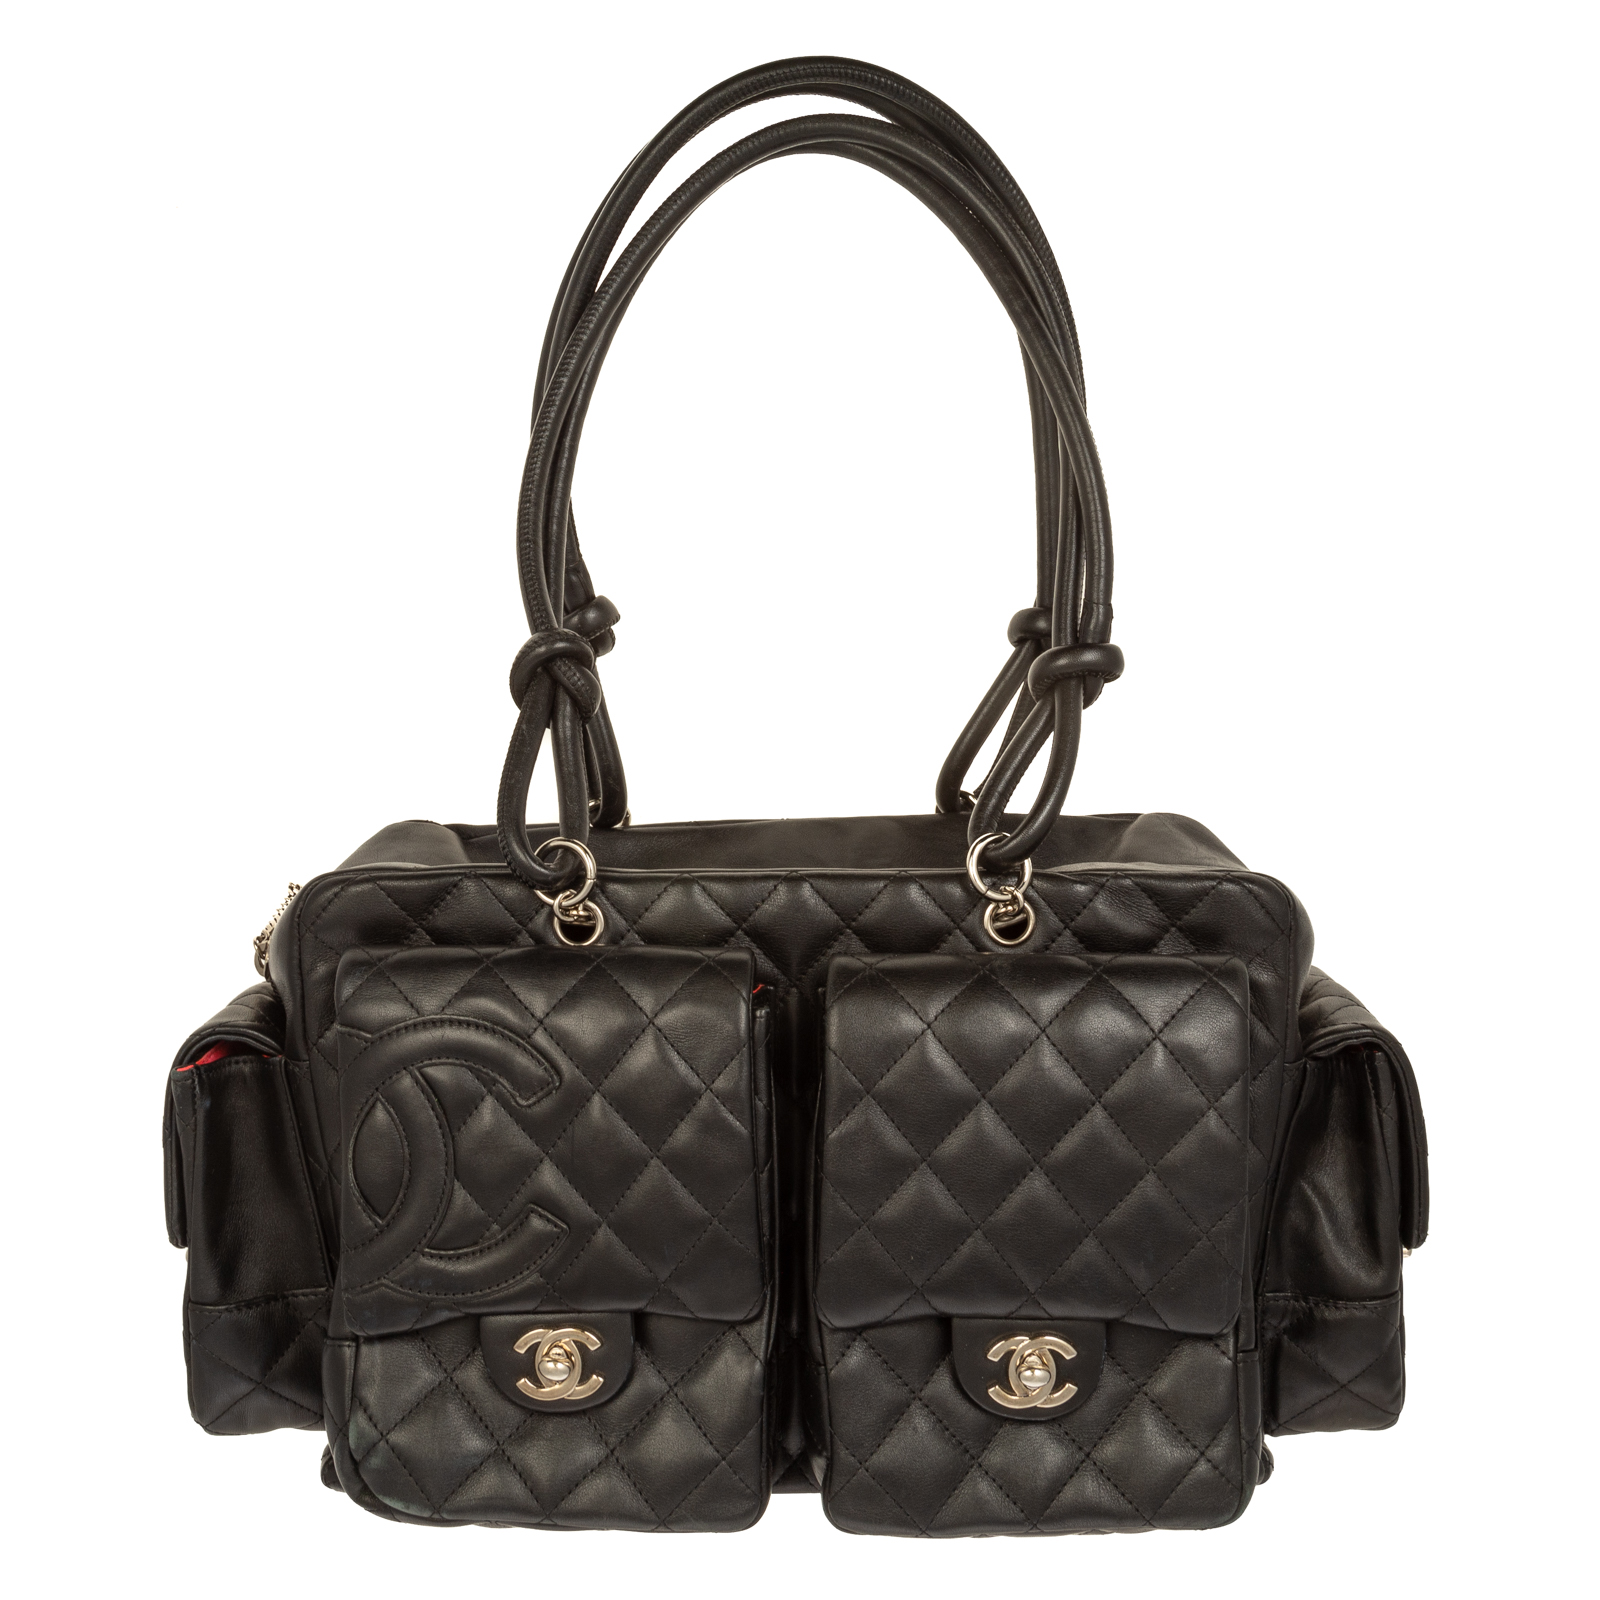 A CHANEL LARGE LIGNE CAMBON REPORTER